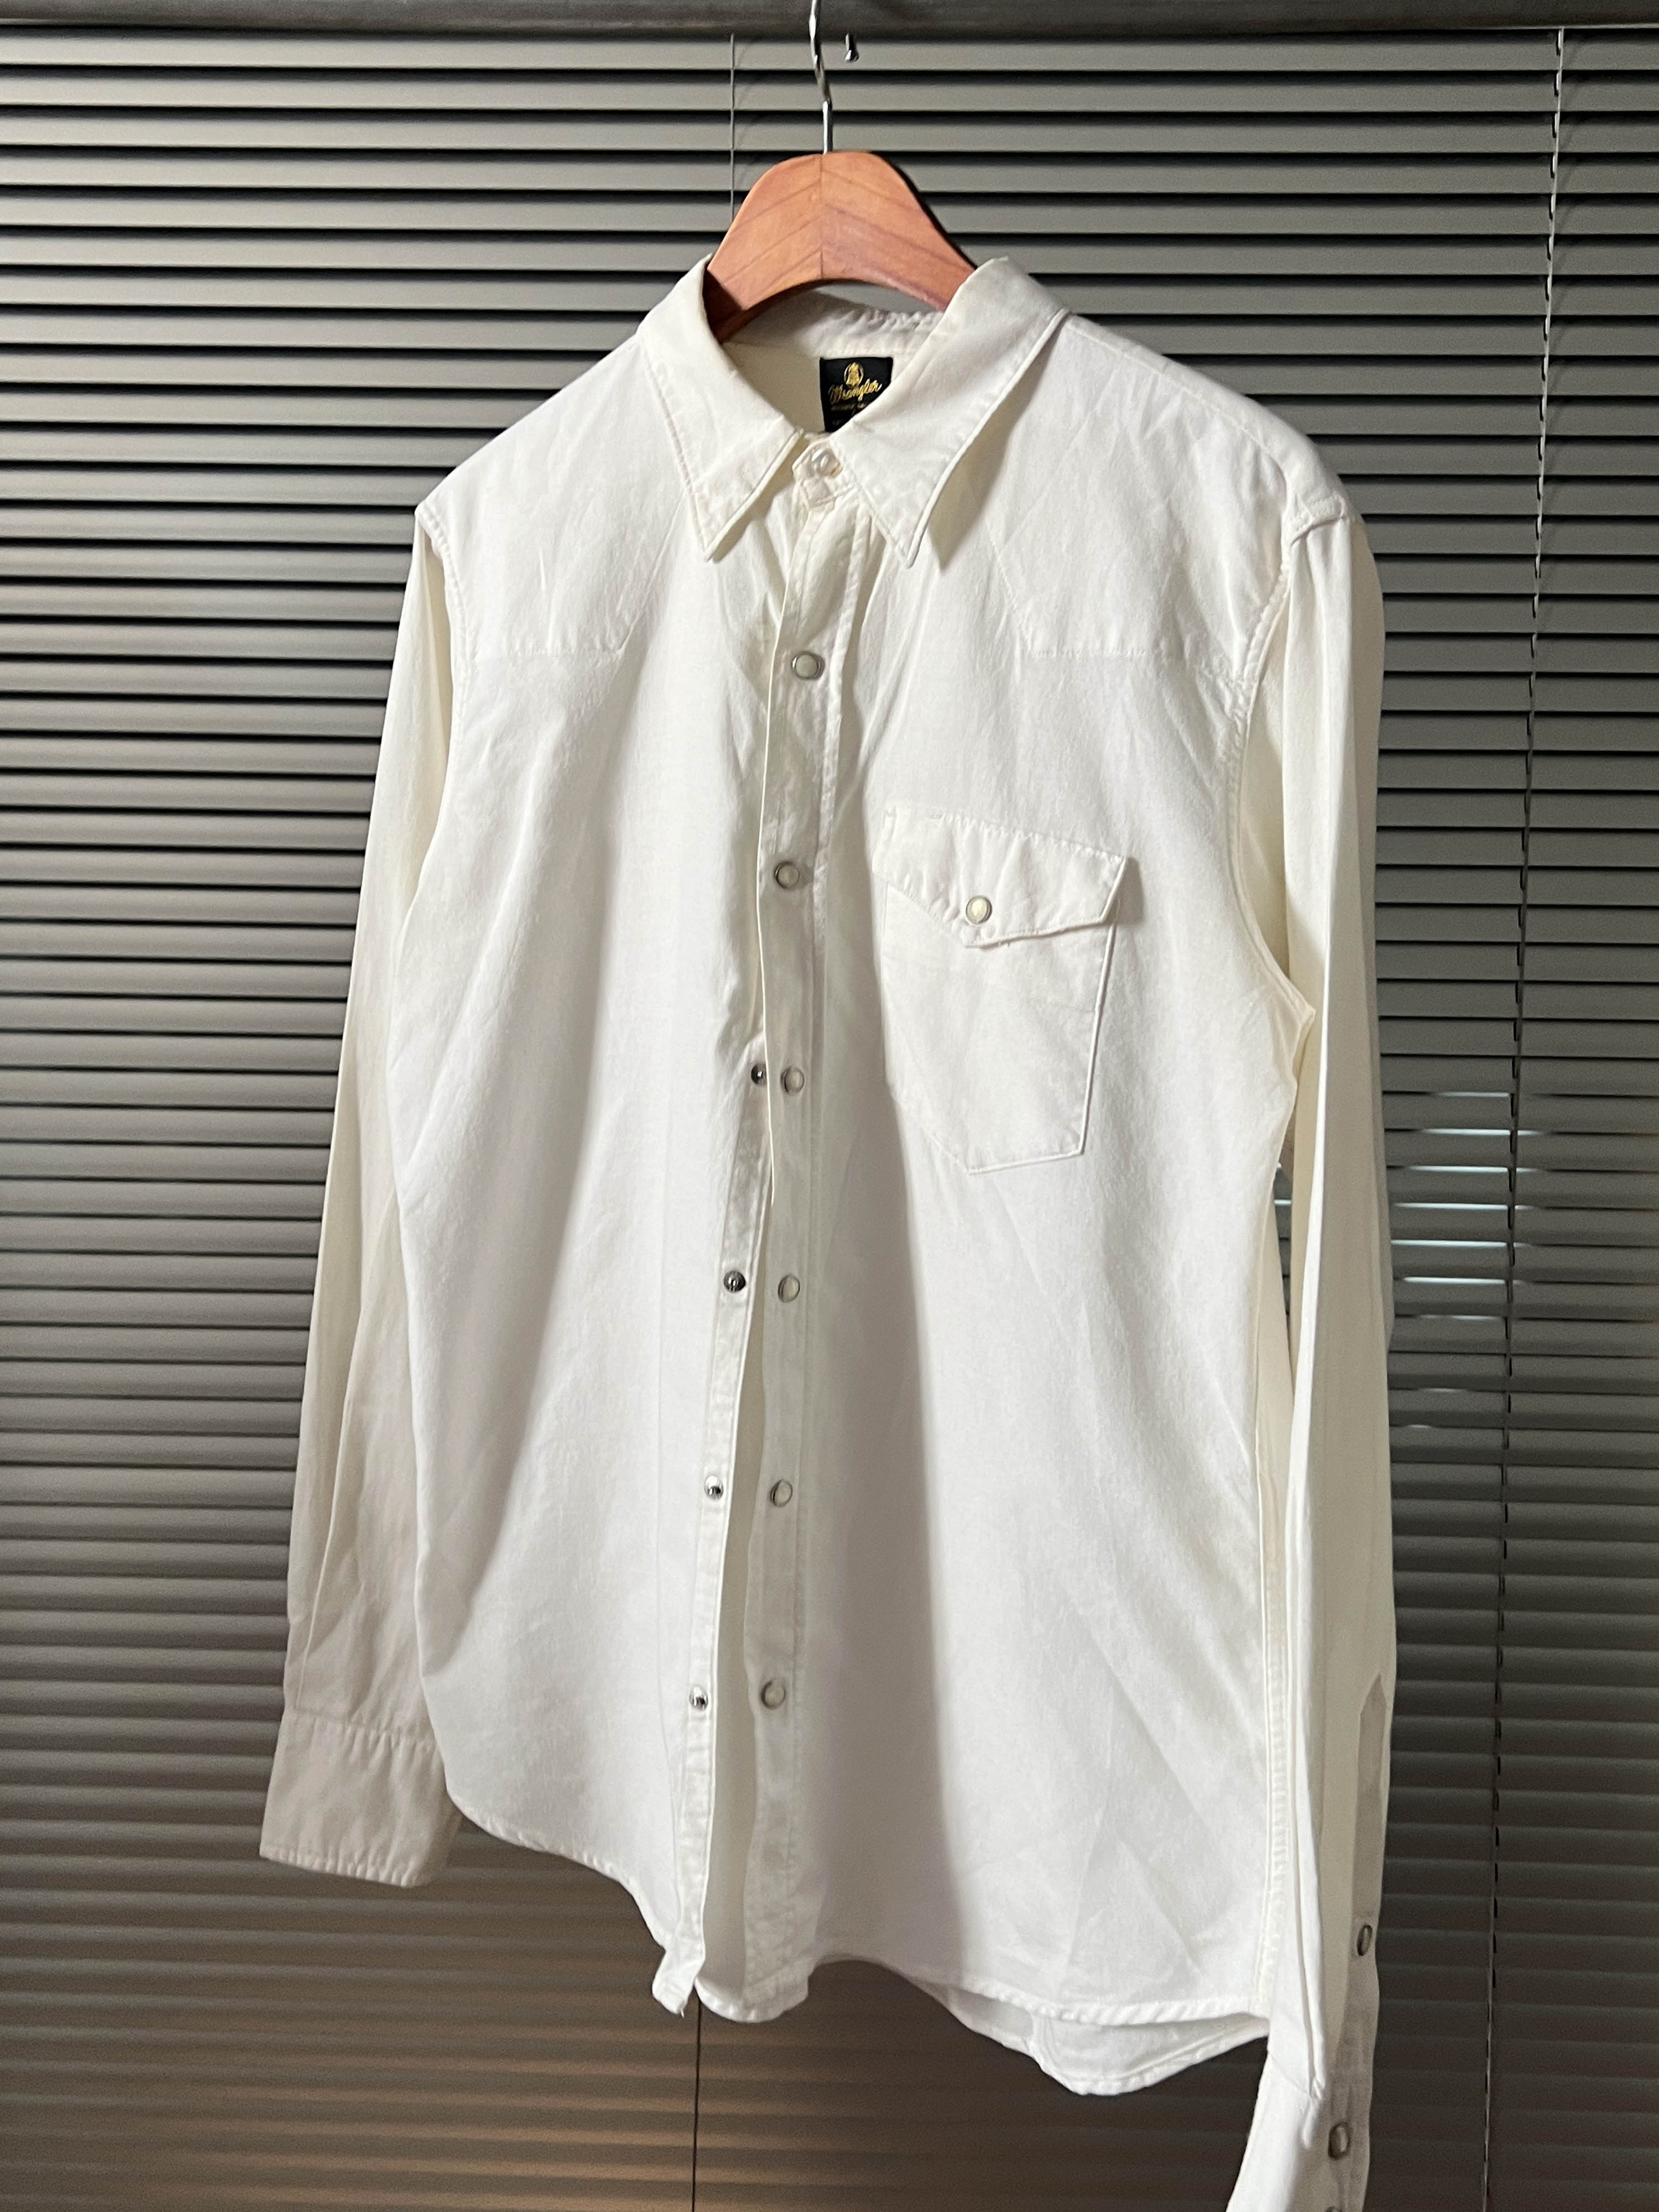 Wrangler for UNITED ARROWS western shirts